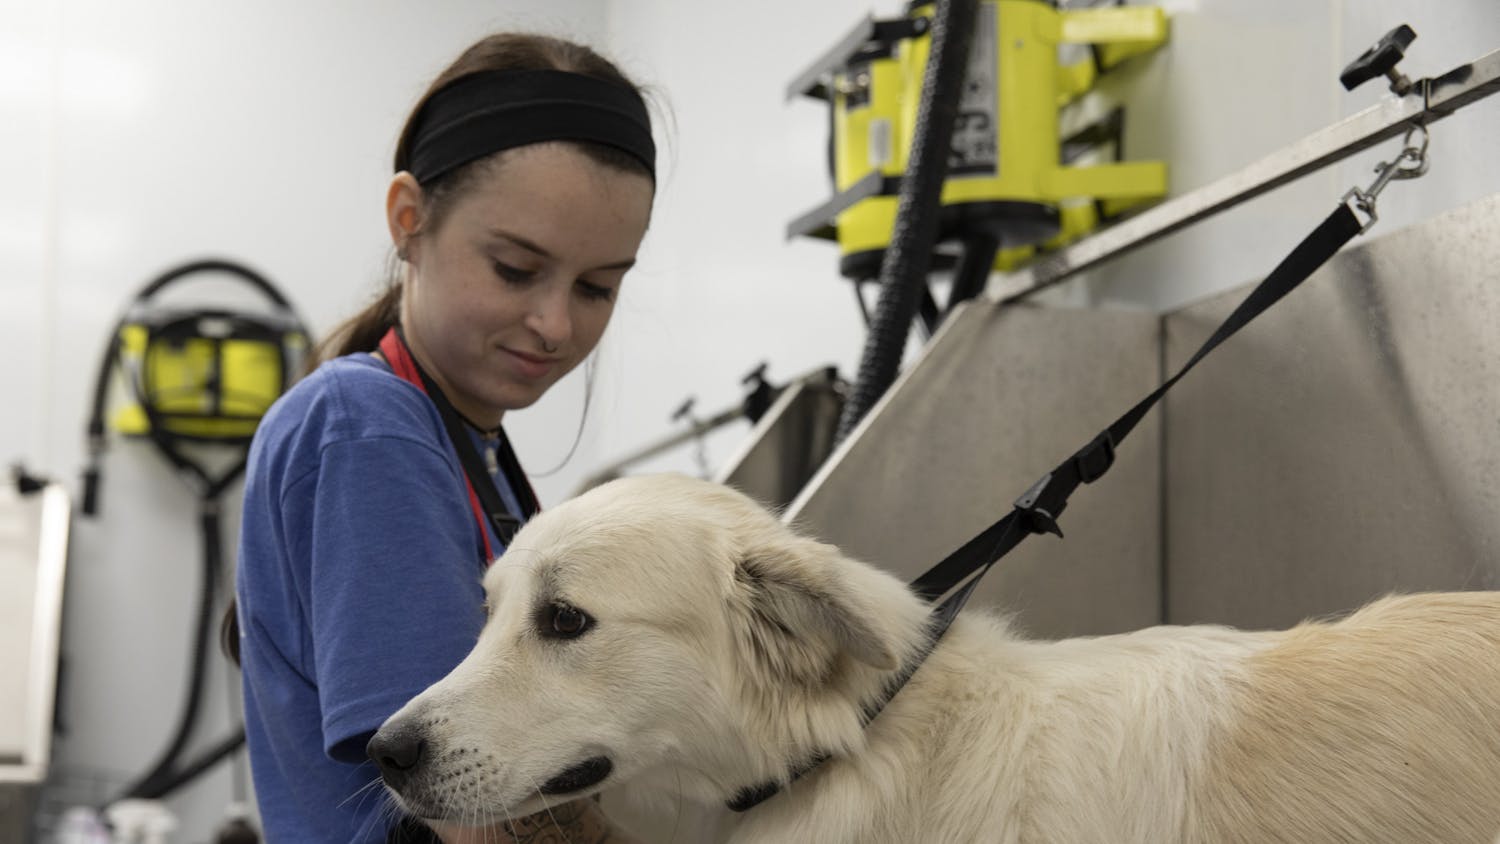 Sarah Headley, a pet groomer at Scenthound, sprays water on Daisy, the dog, on Tuesday, May 25, 2021.